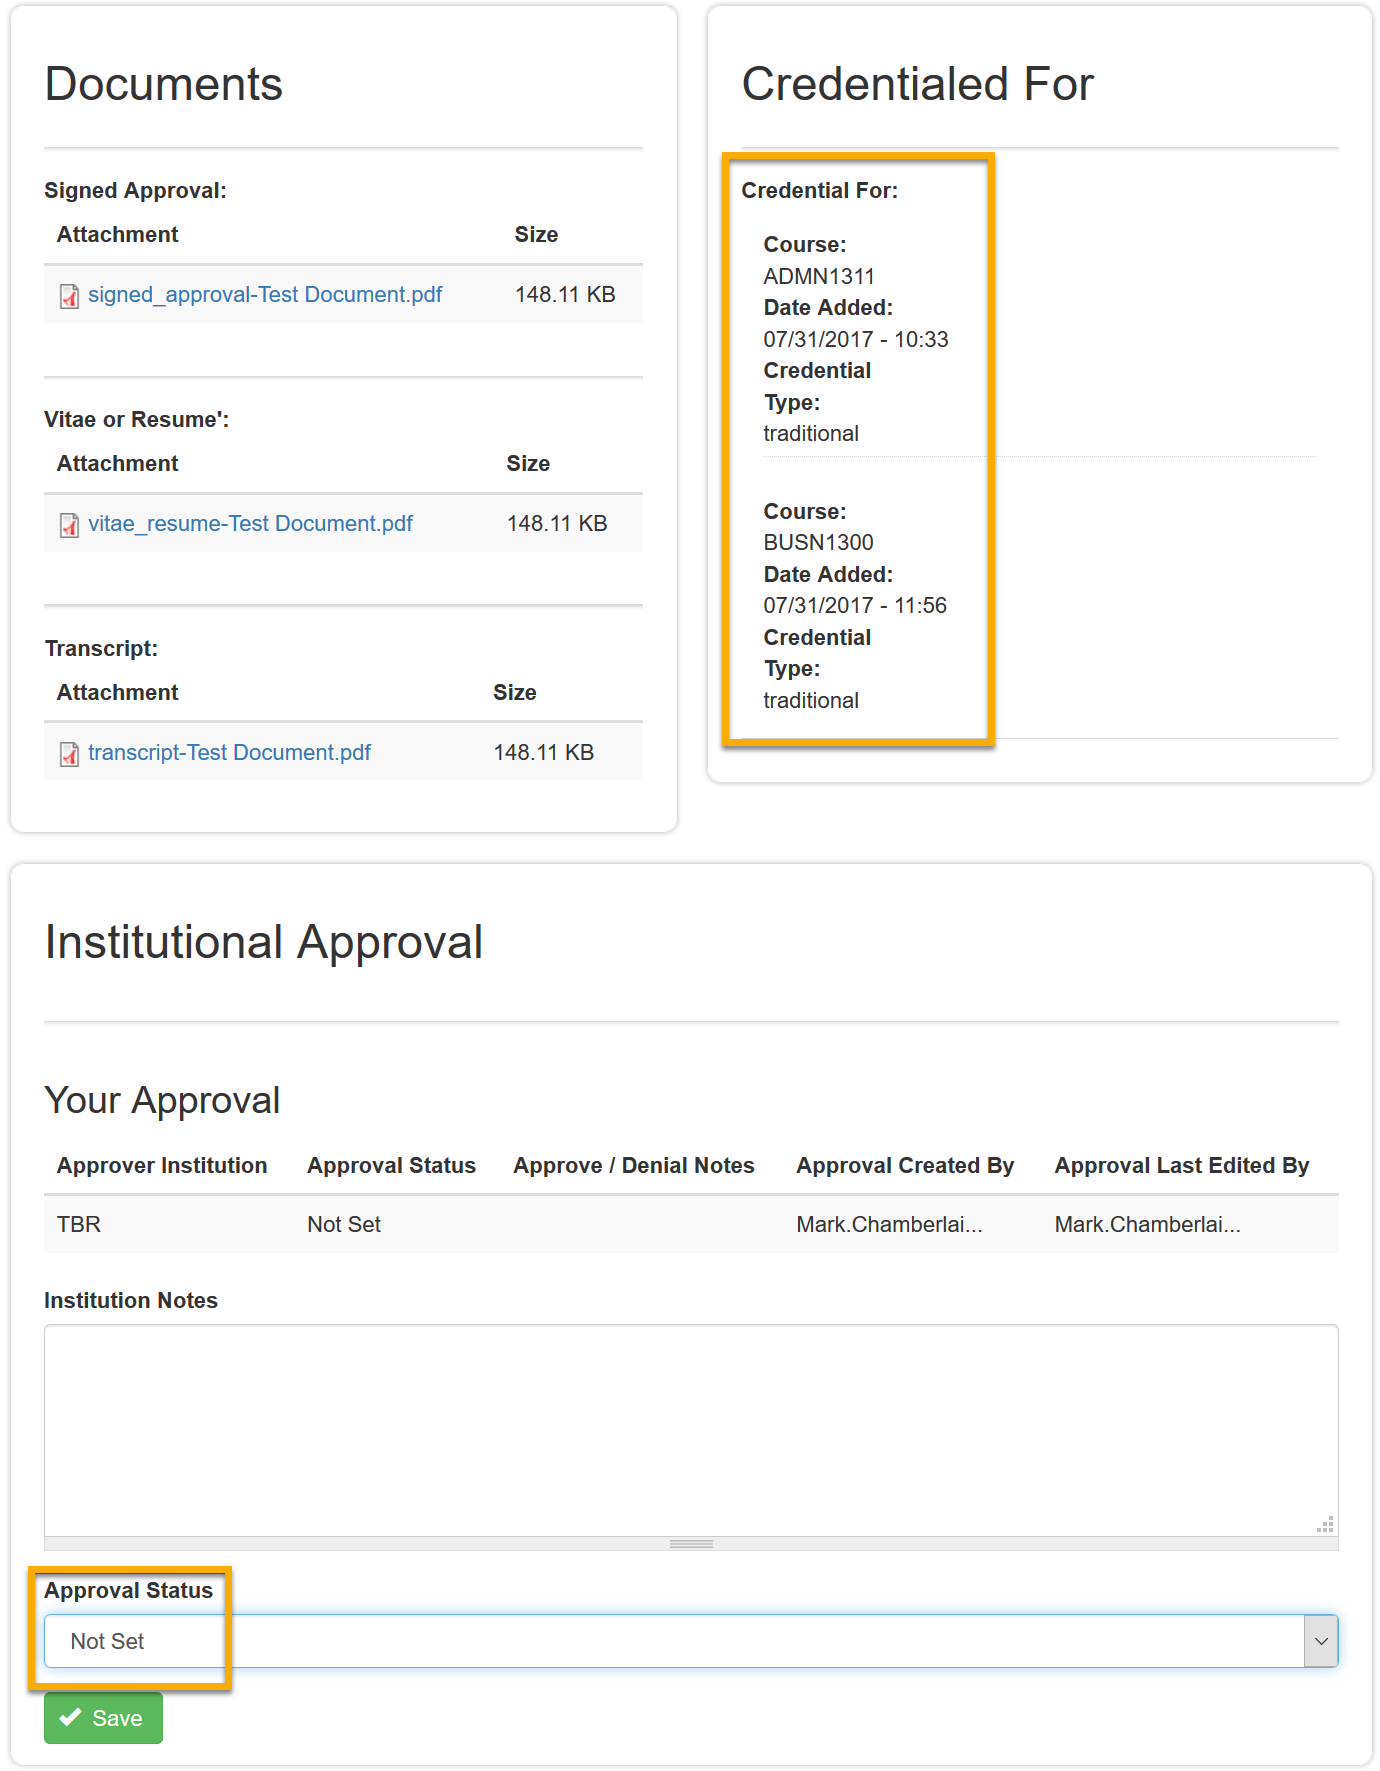 Profile scrolled down to Documents and Credentials. Courses circled and Approval Status menu is open.